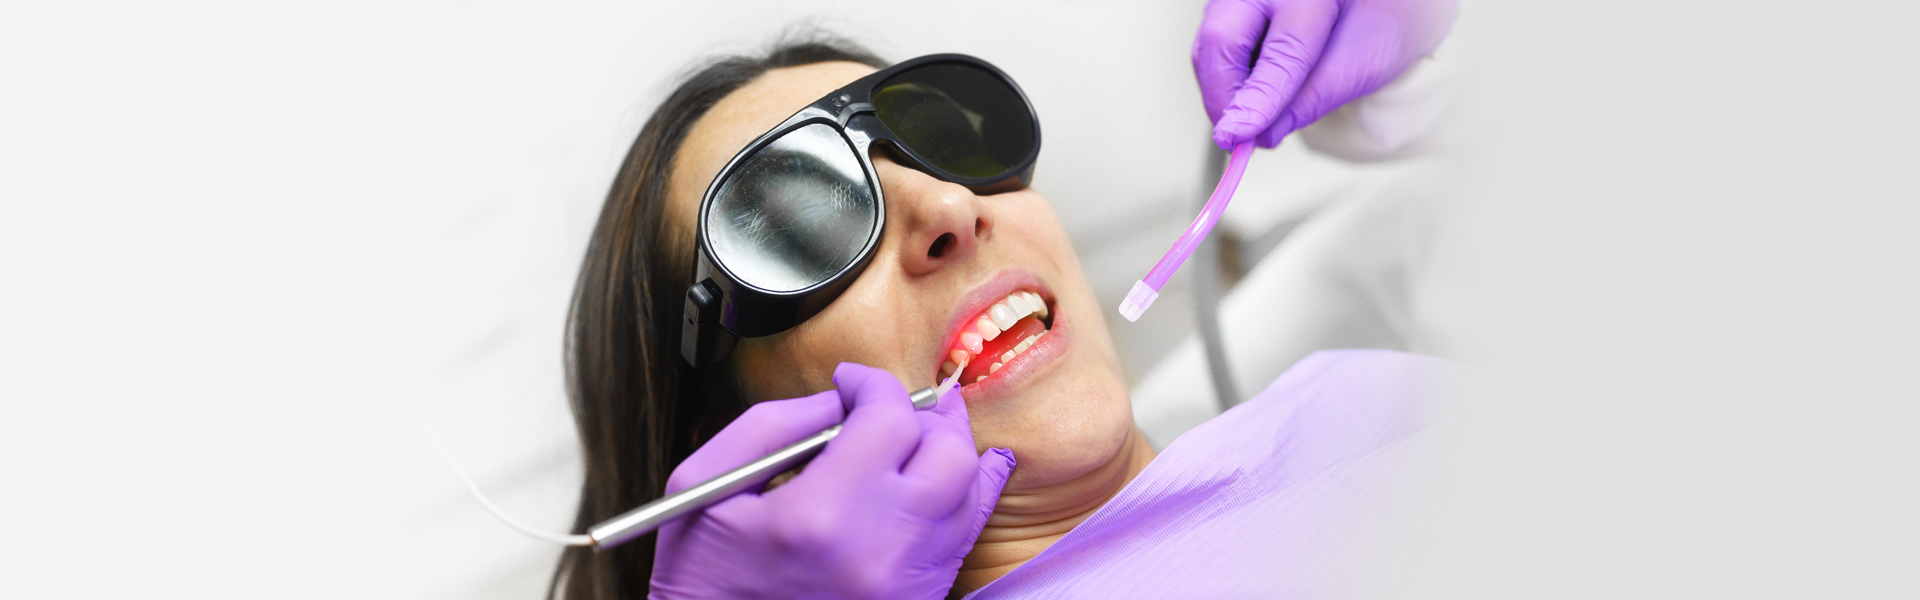 What Are Dental Lasers in Dentistry?